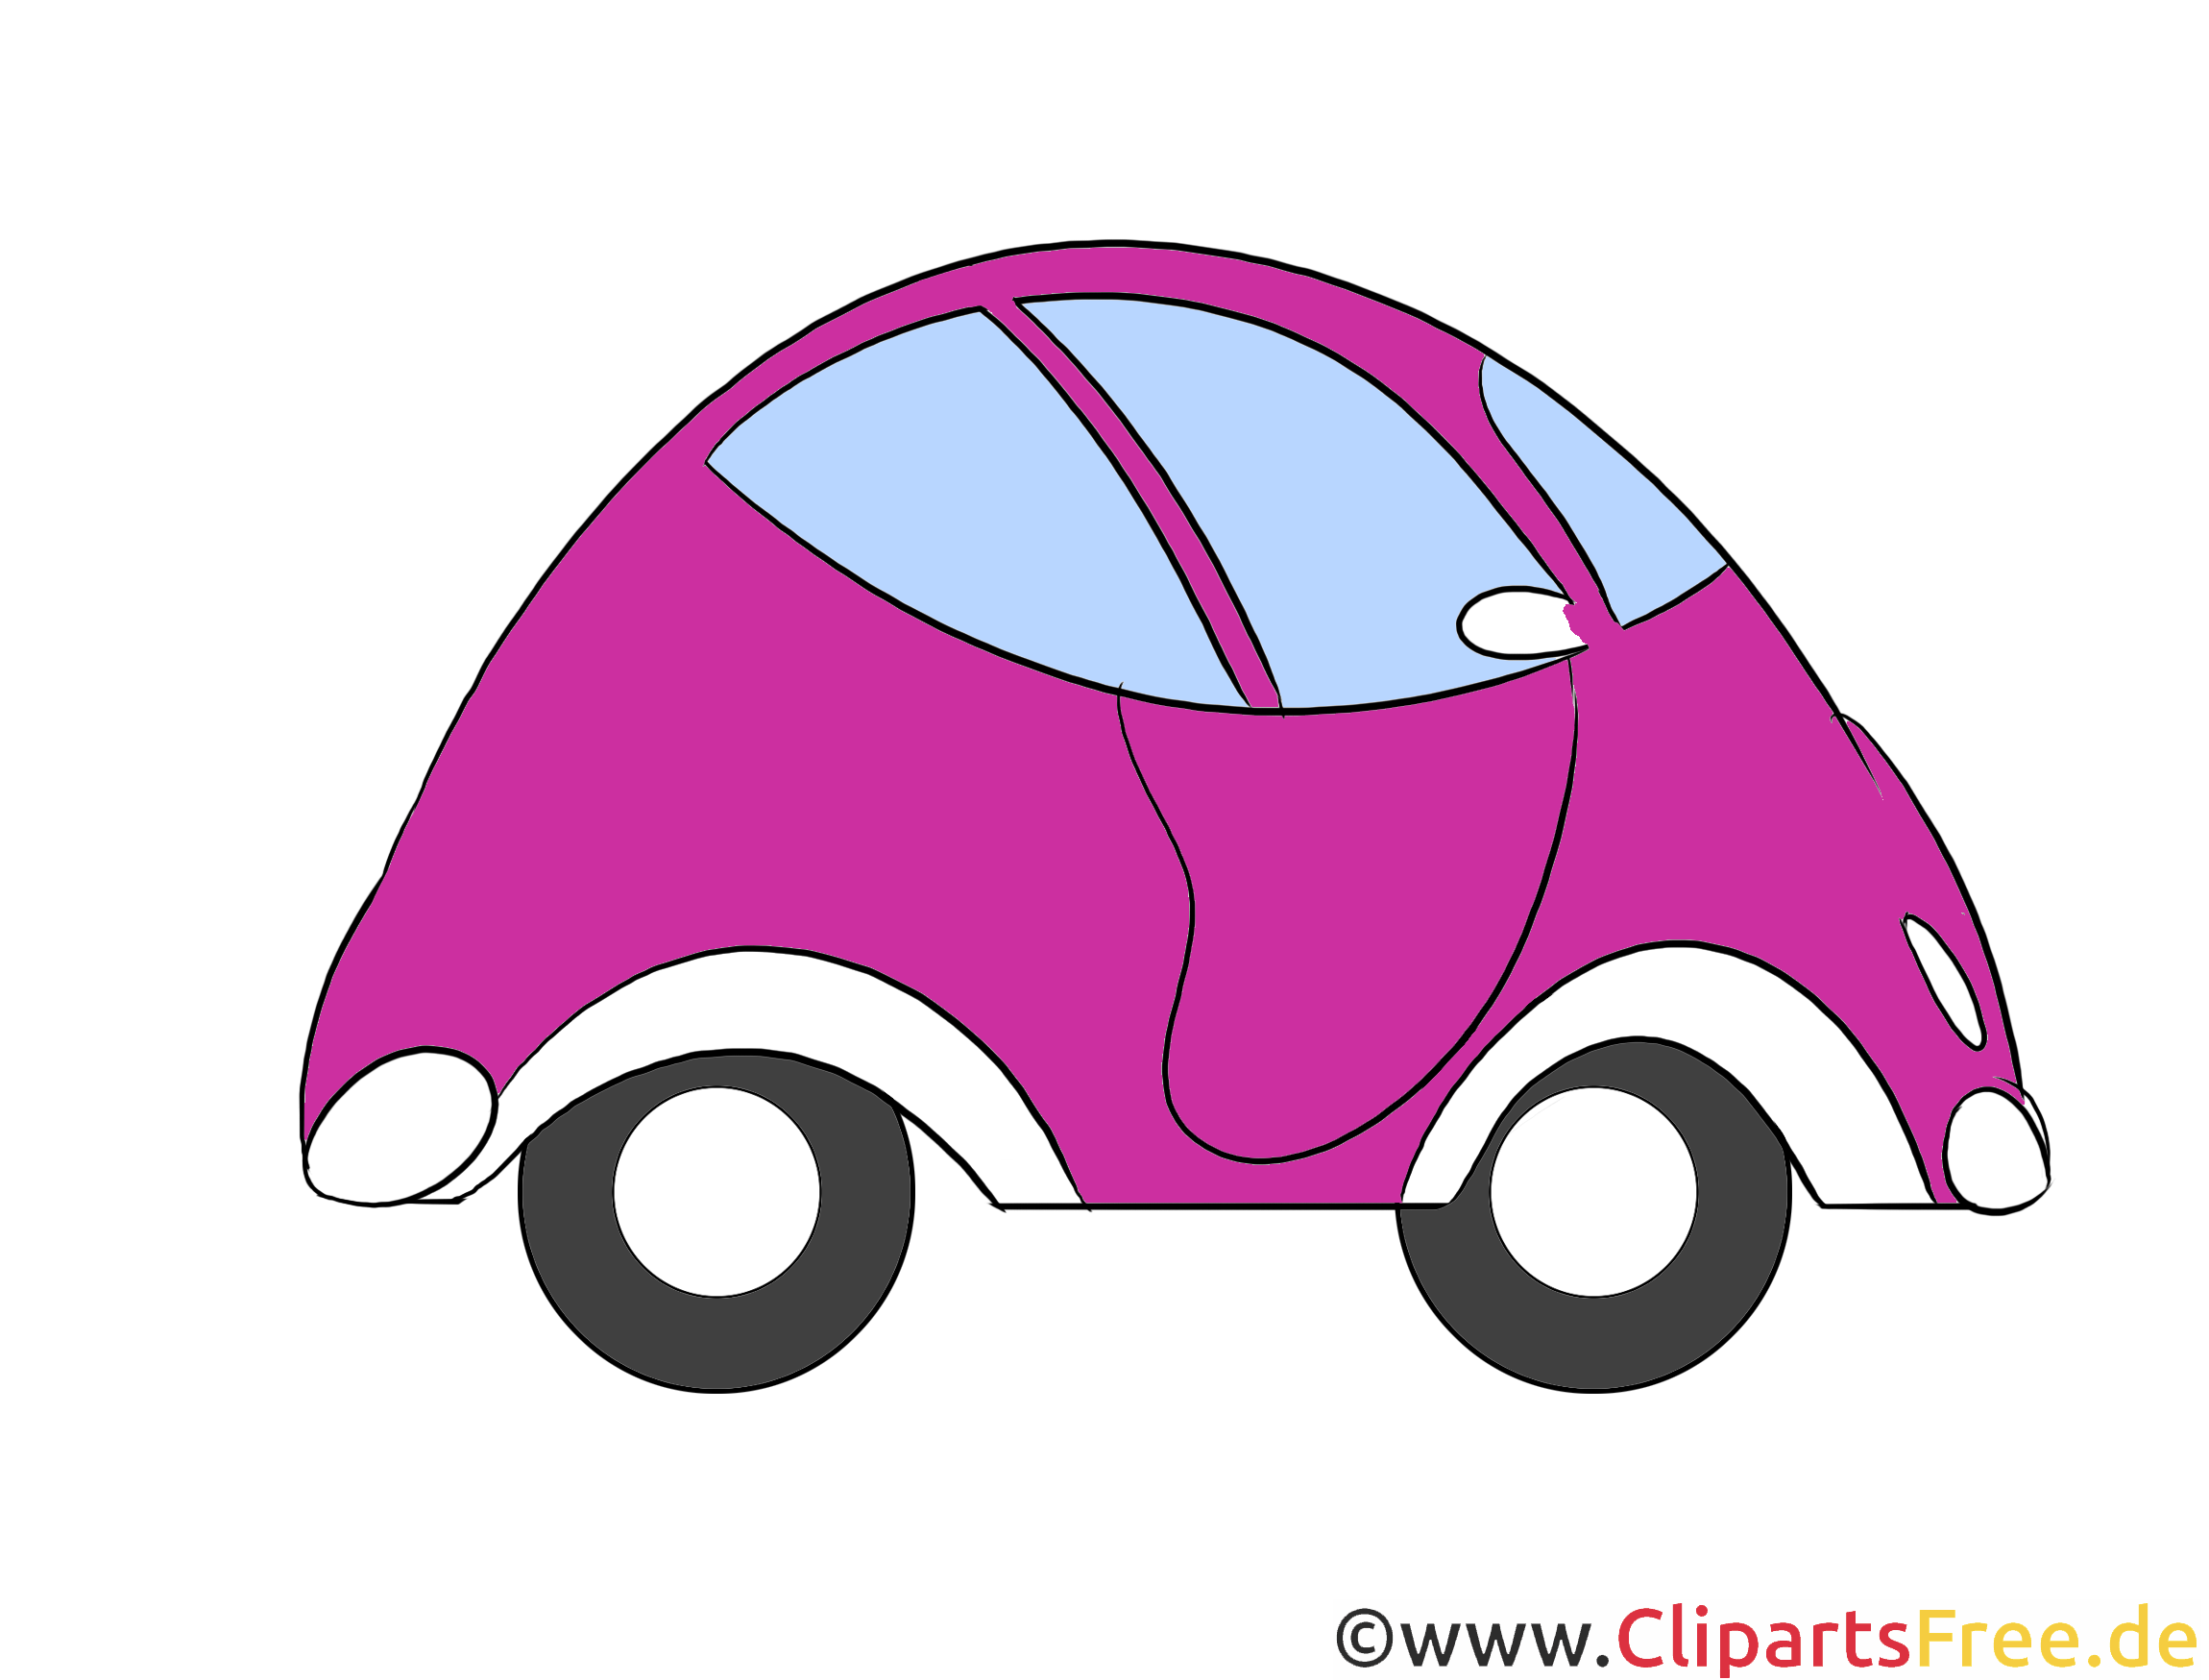 Clipart free: Homepage. 